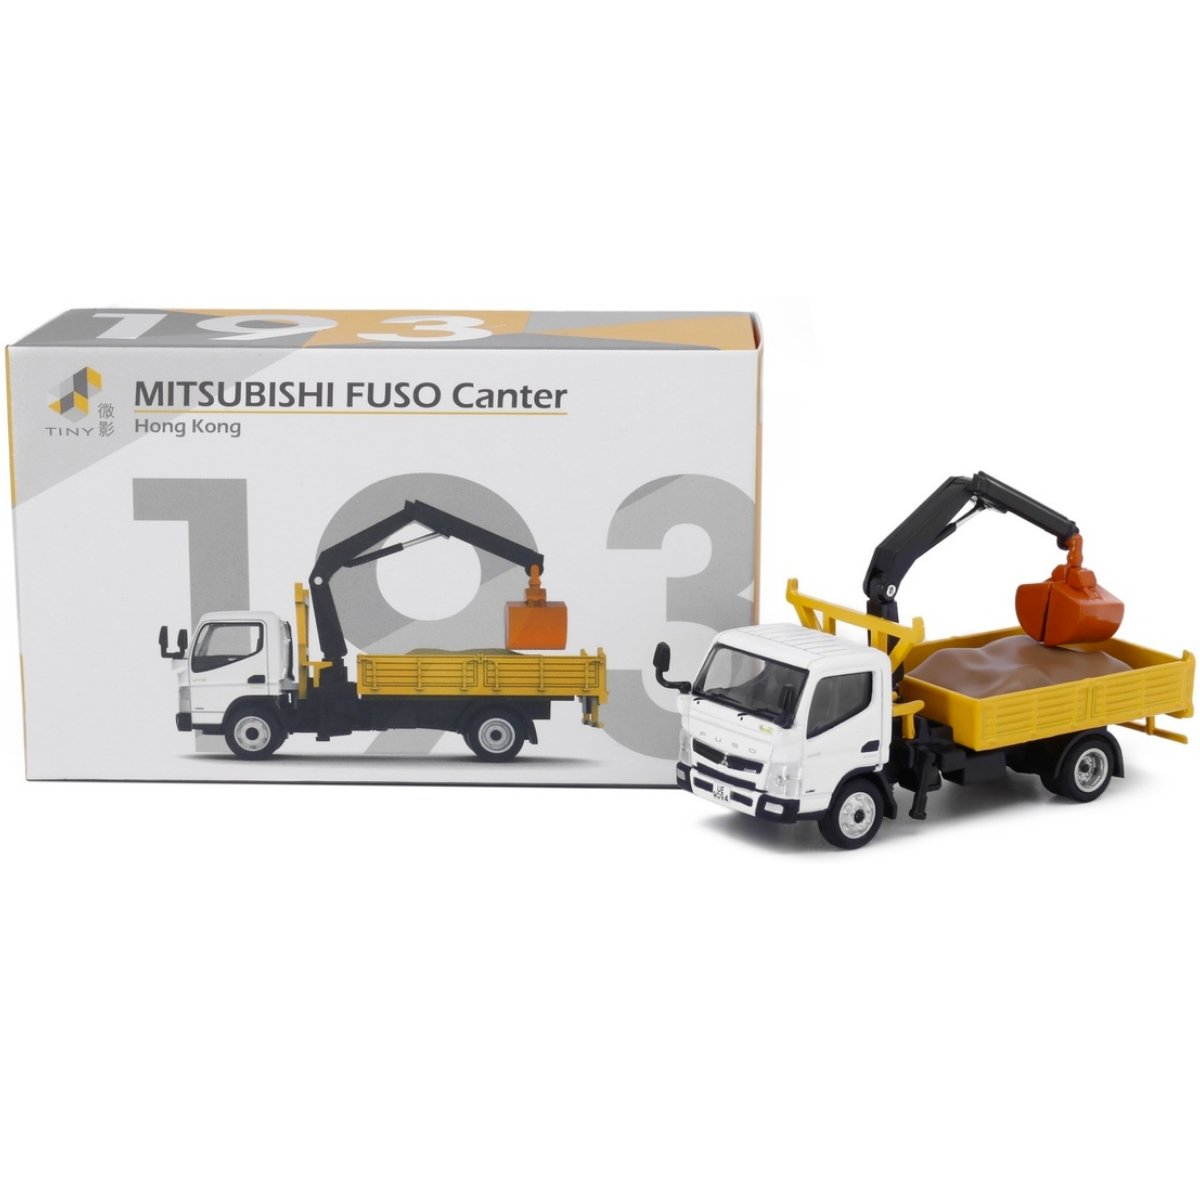 Tiny Models Mitsubishi Fuso Canter Grab Lorry (1:76 Scale) - Phillips Hobbies